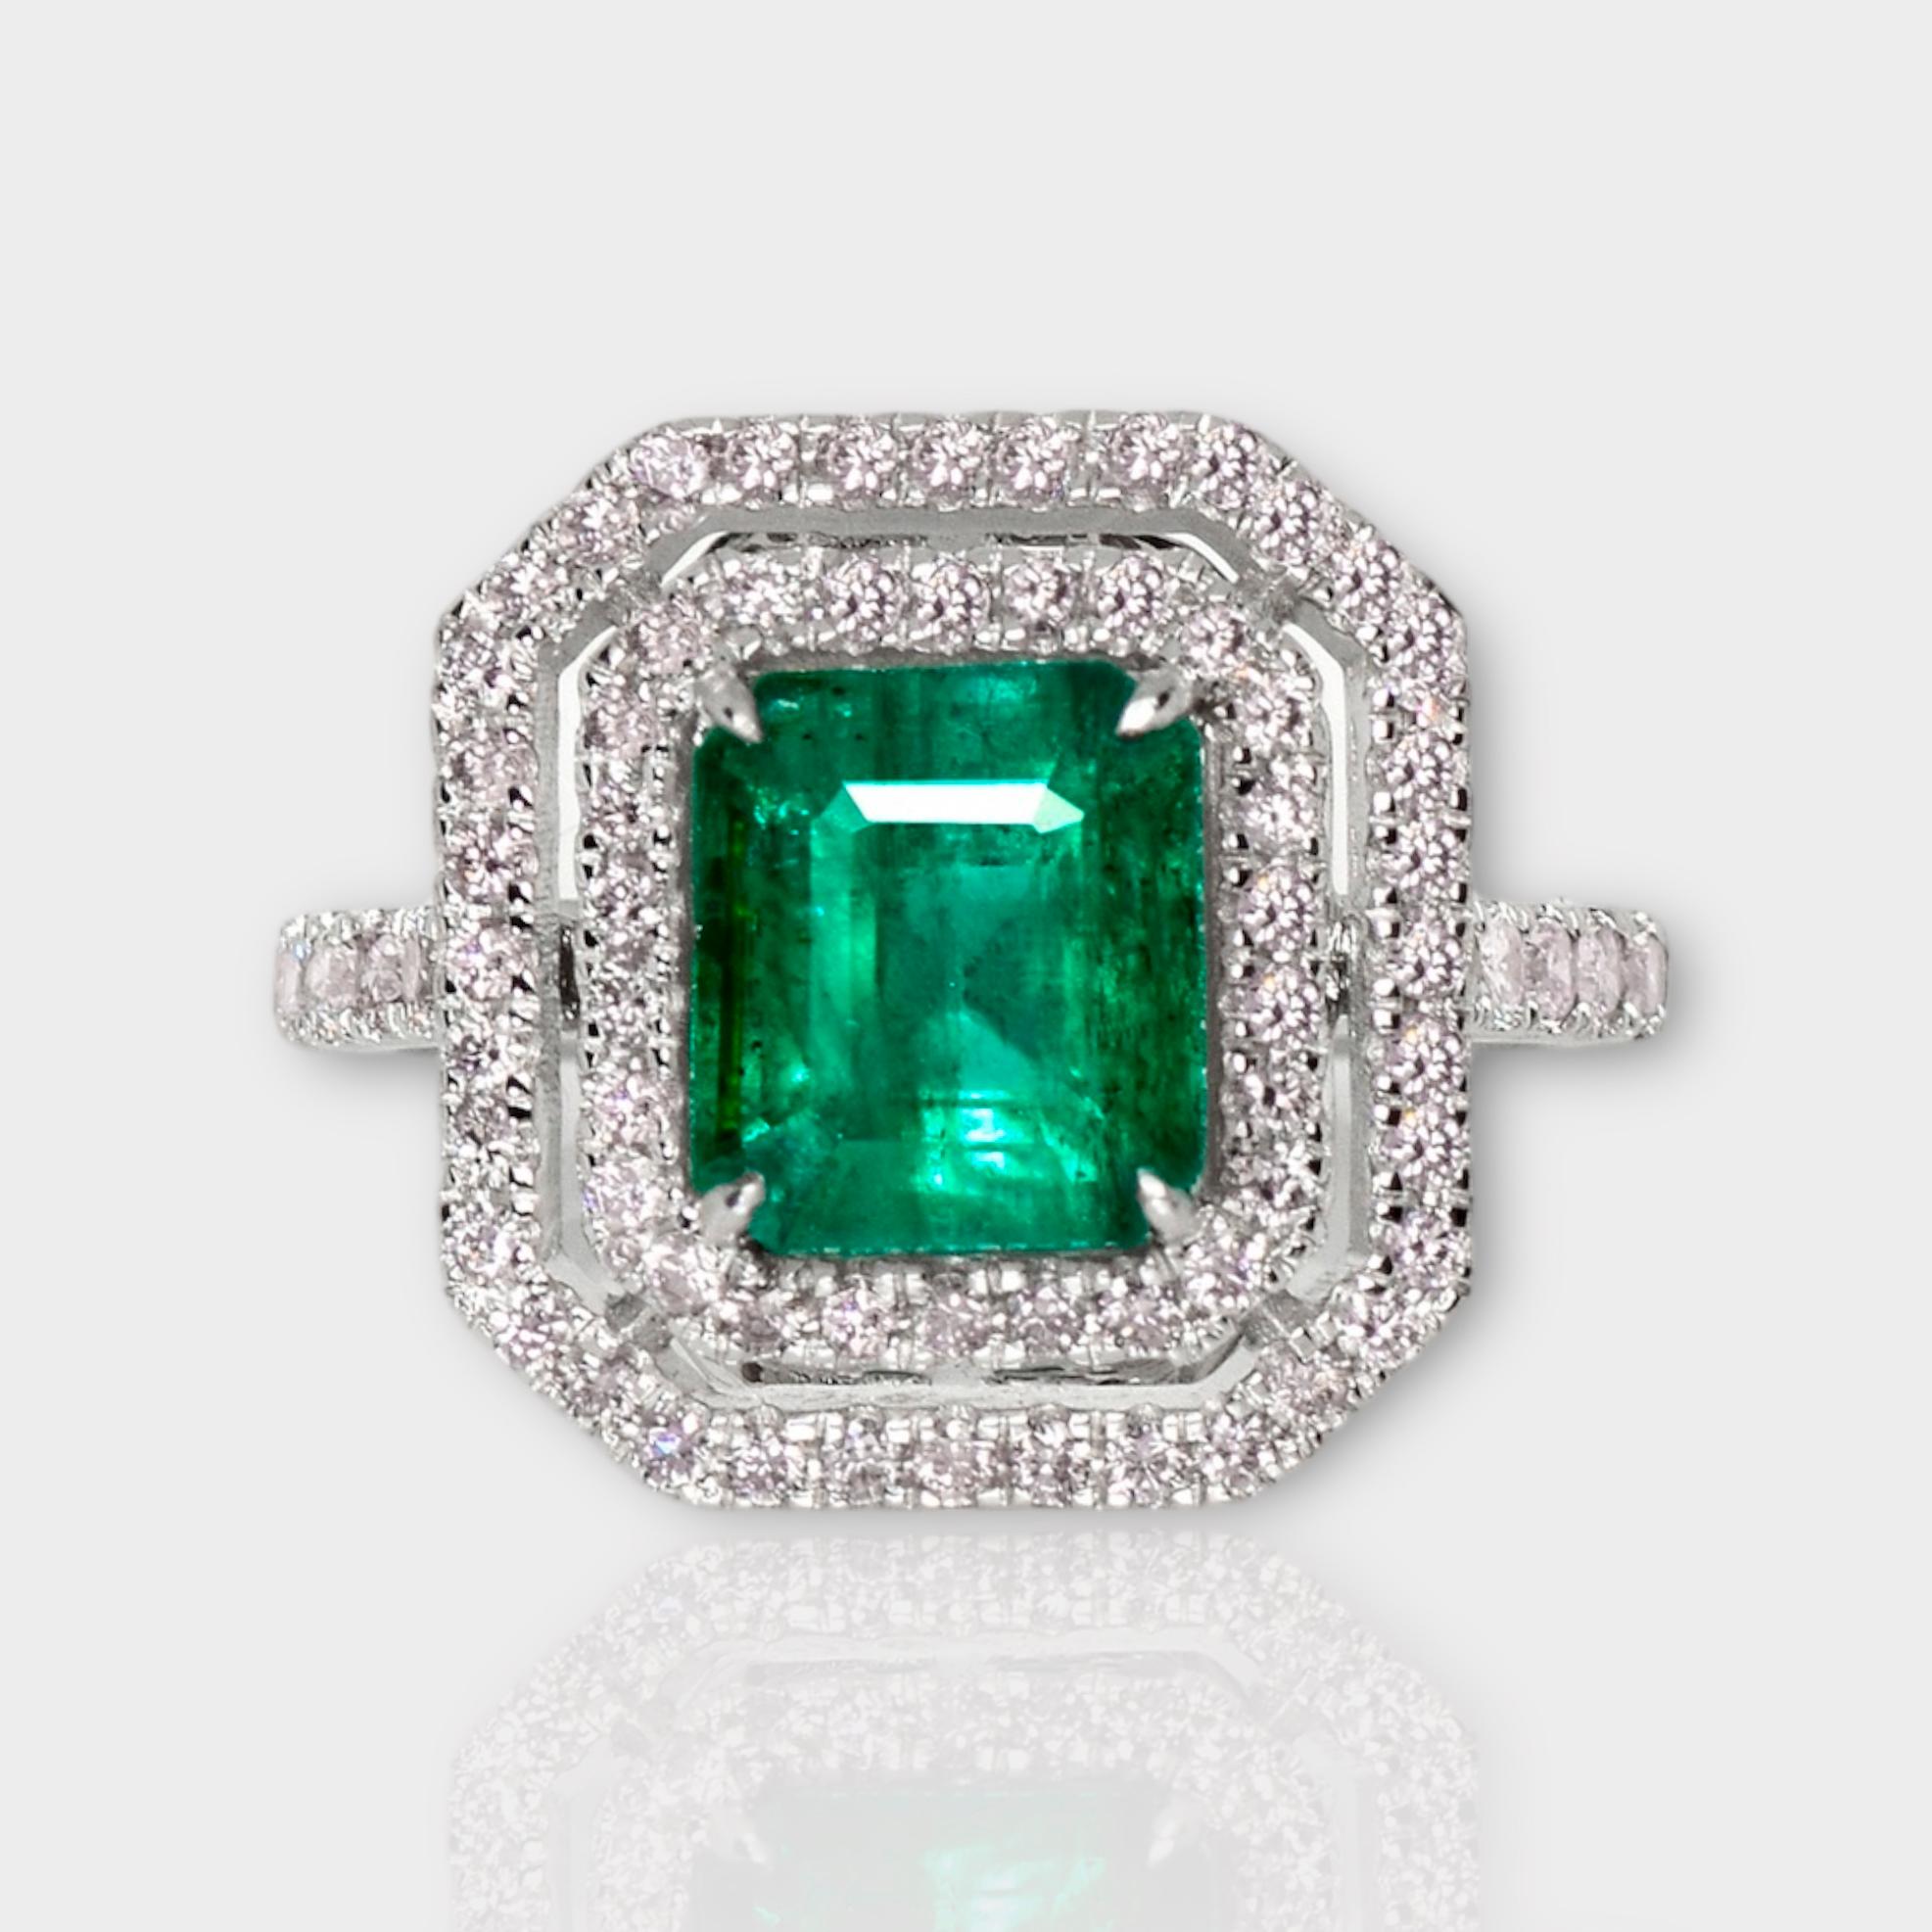 **IGI 18K White Gold 2.35 ct Emerald&Pink Diamonds Antique Art Deco Style Engagement Ring** 

An IGI-certified natural Zambia green emerald weighing 2.35 ct is set on an 18K white gold arc deco design band with natural pink diamonds weighing 0.87